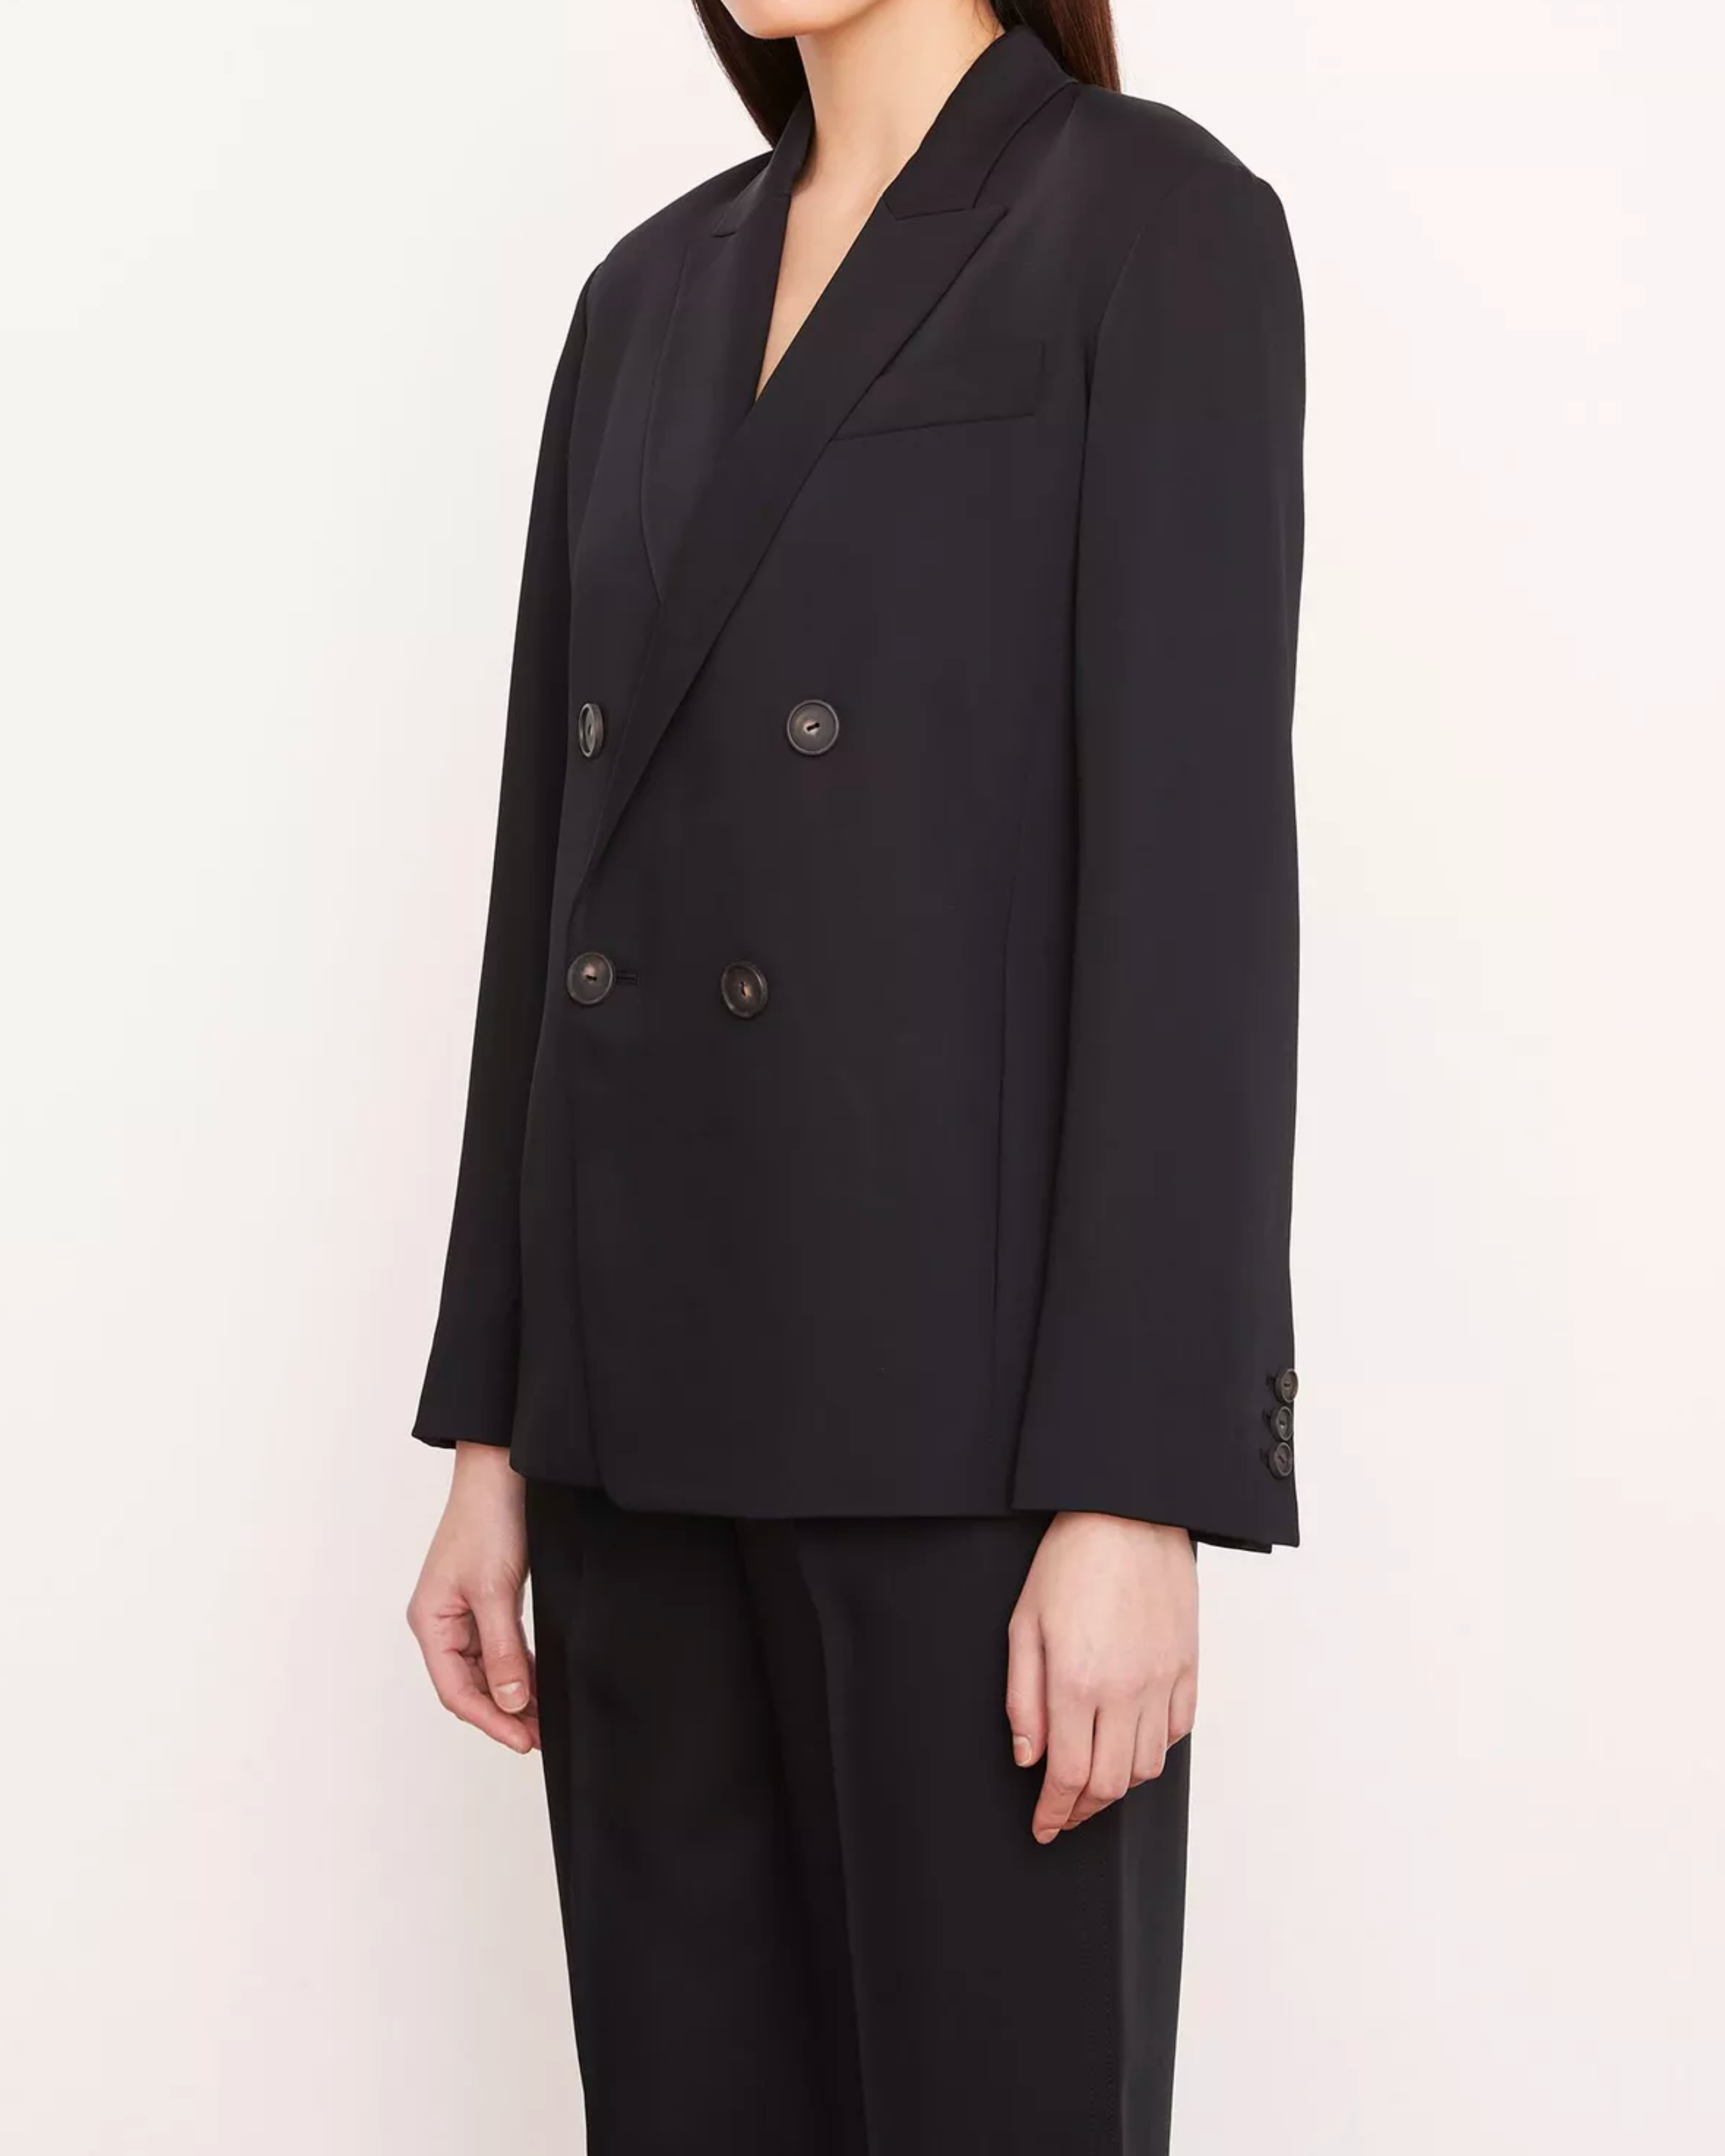 Vince Soft Suiting Double Breasted Blazer in Black